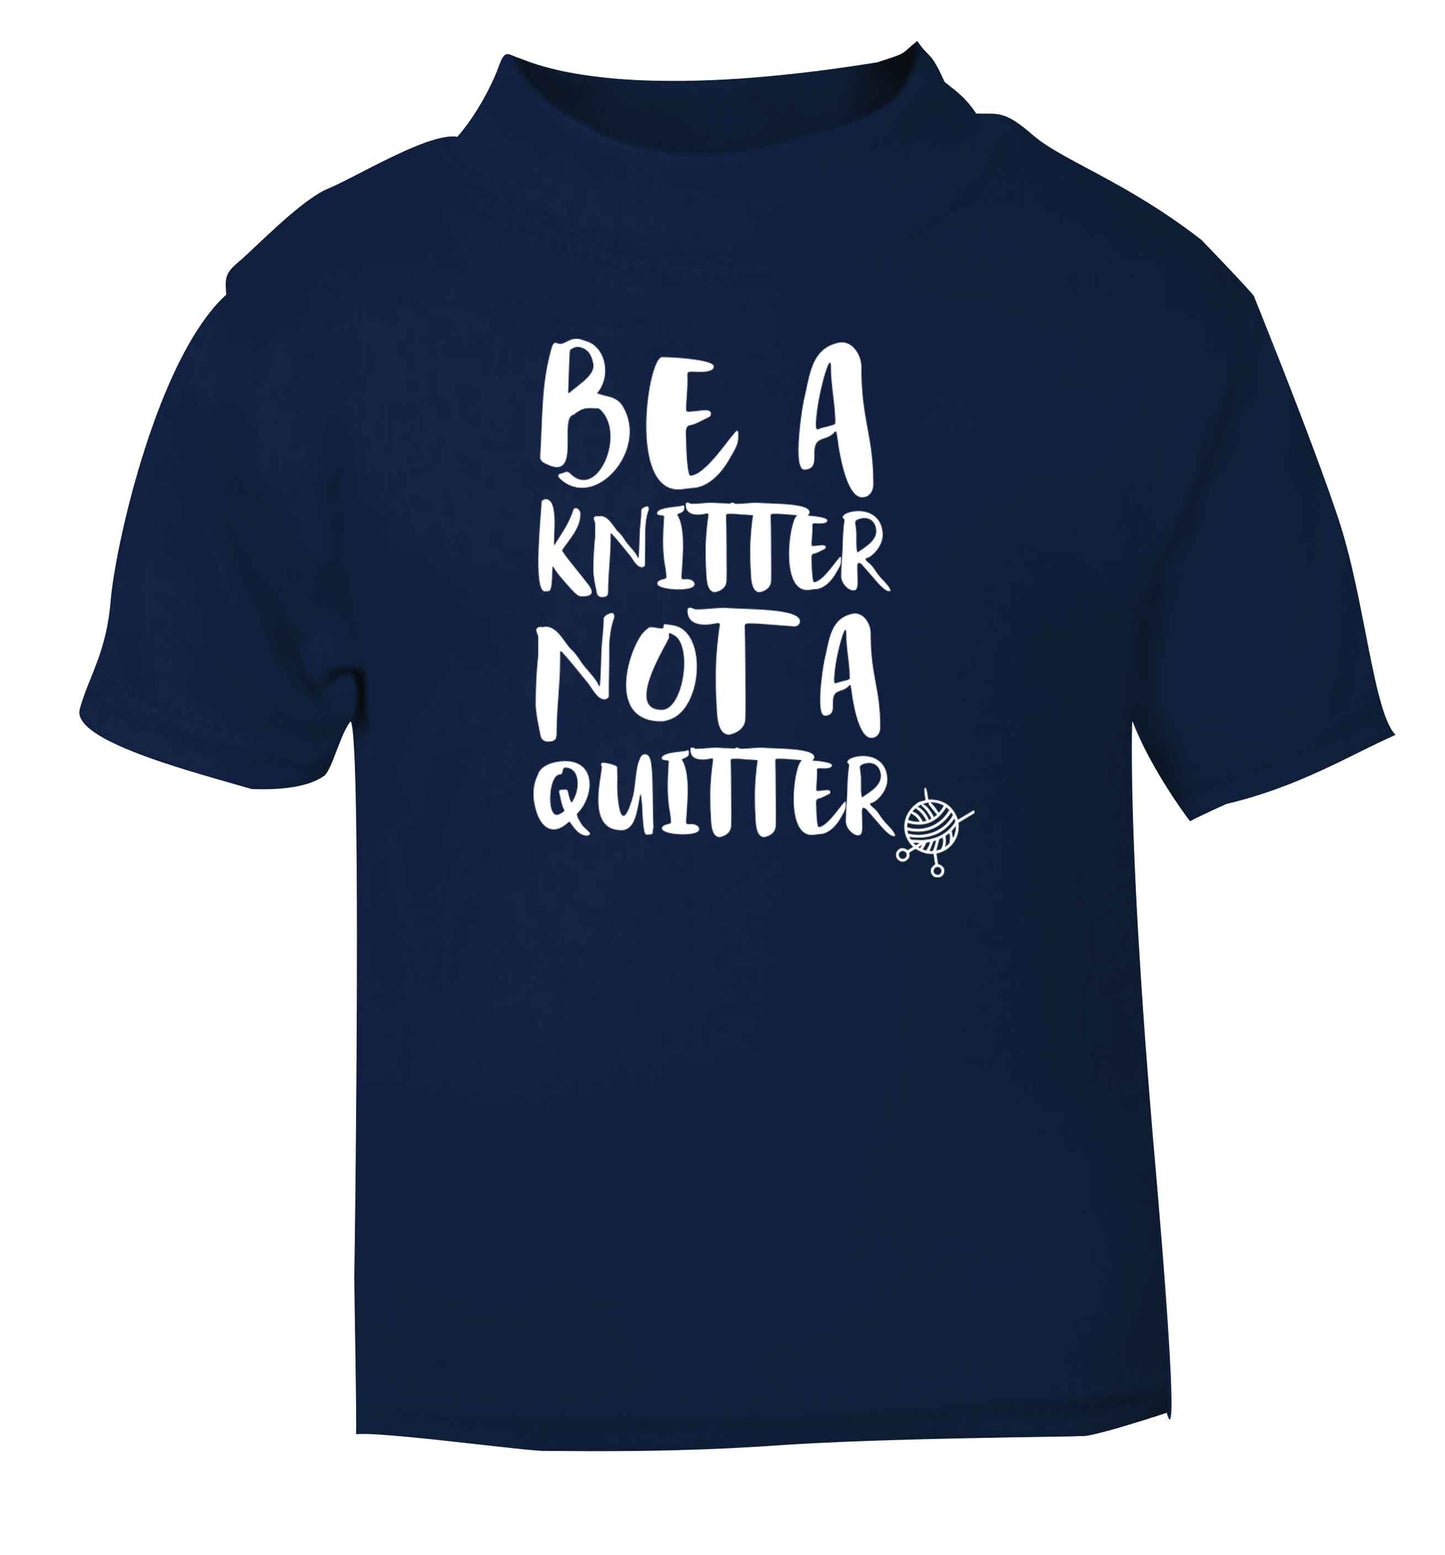 Be a knitter not a quitter navy Baby Toddler Tshirt 2 Years